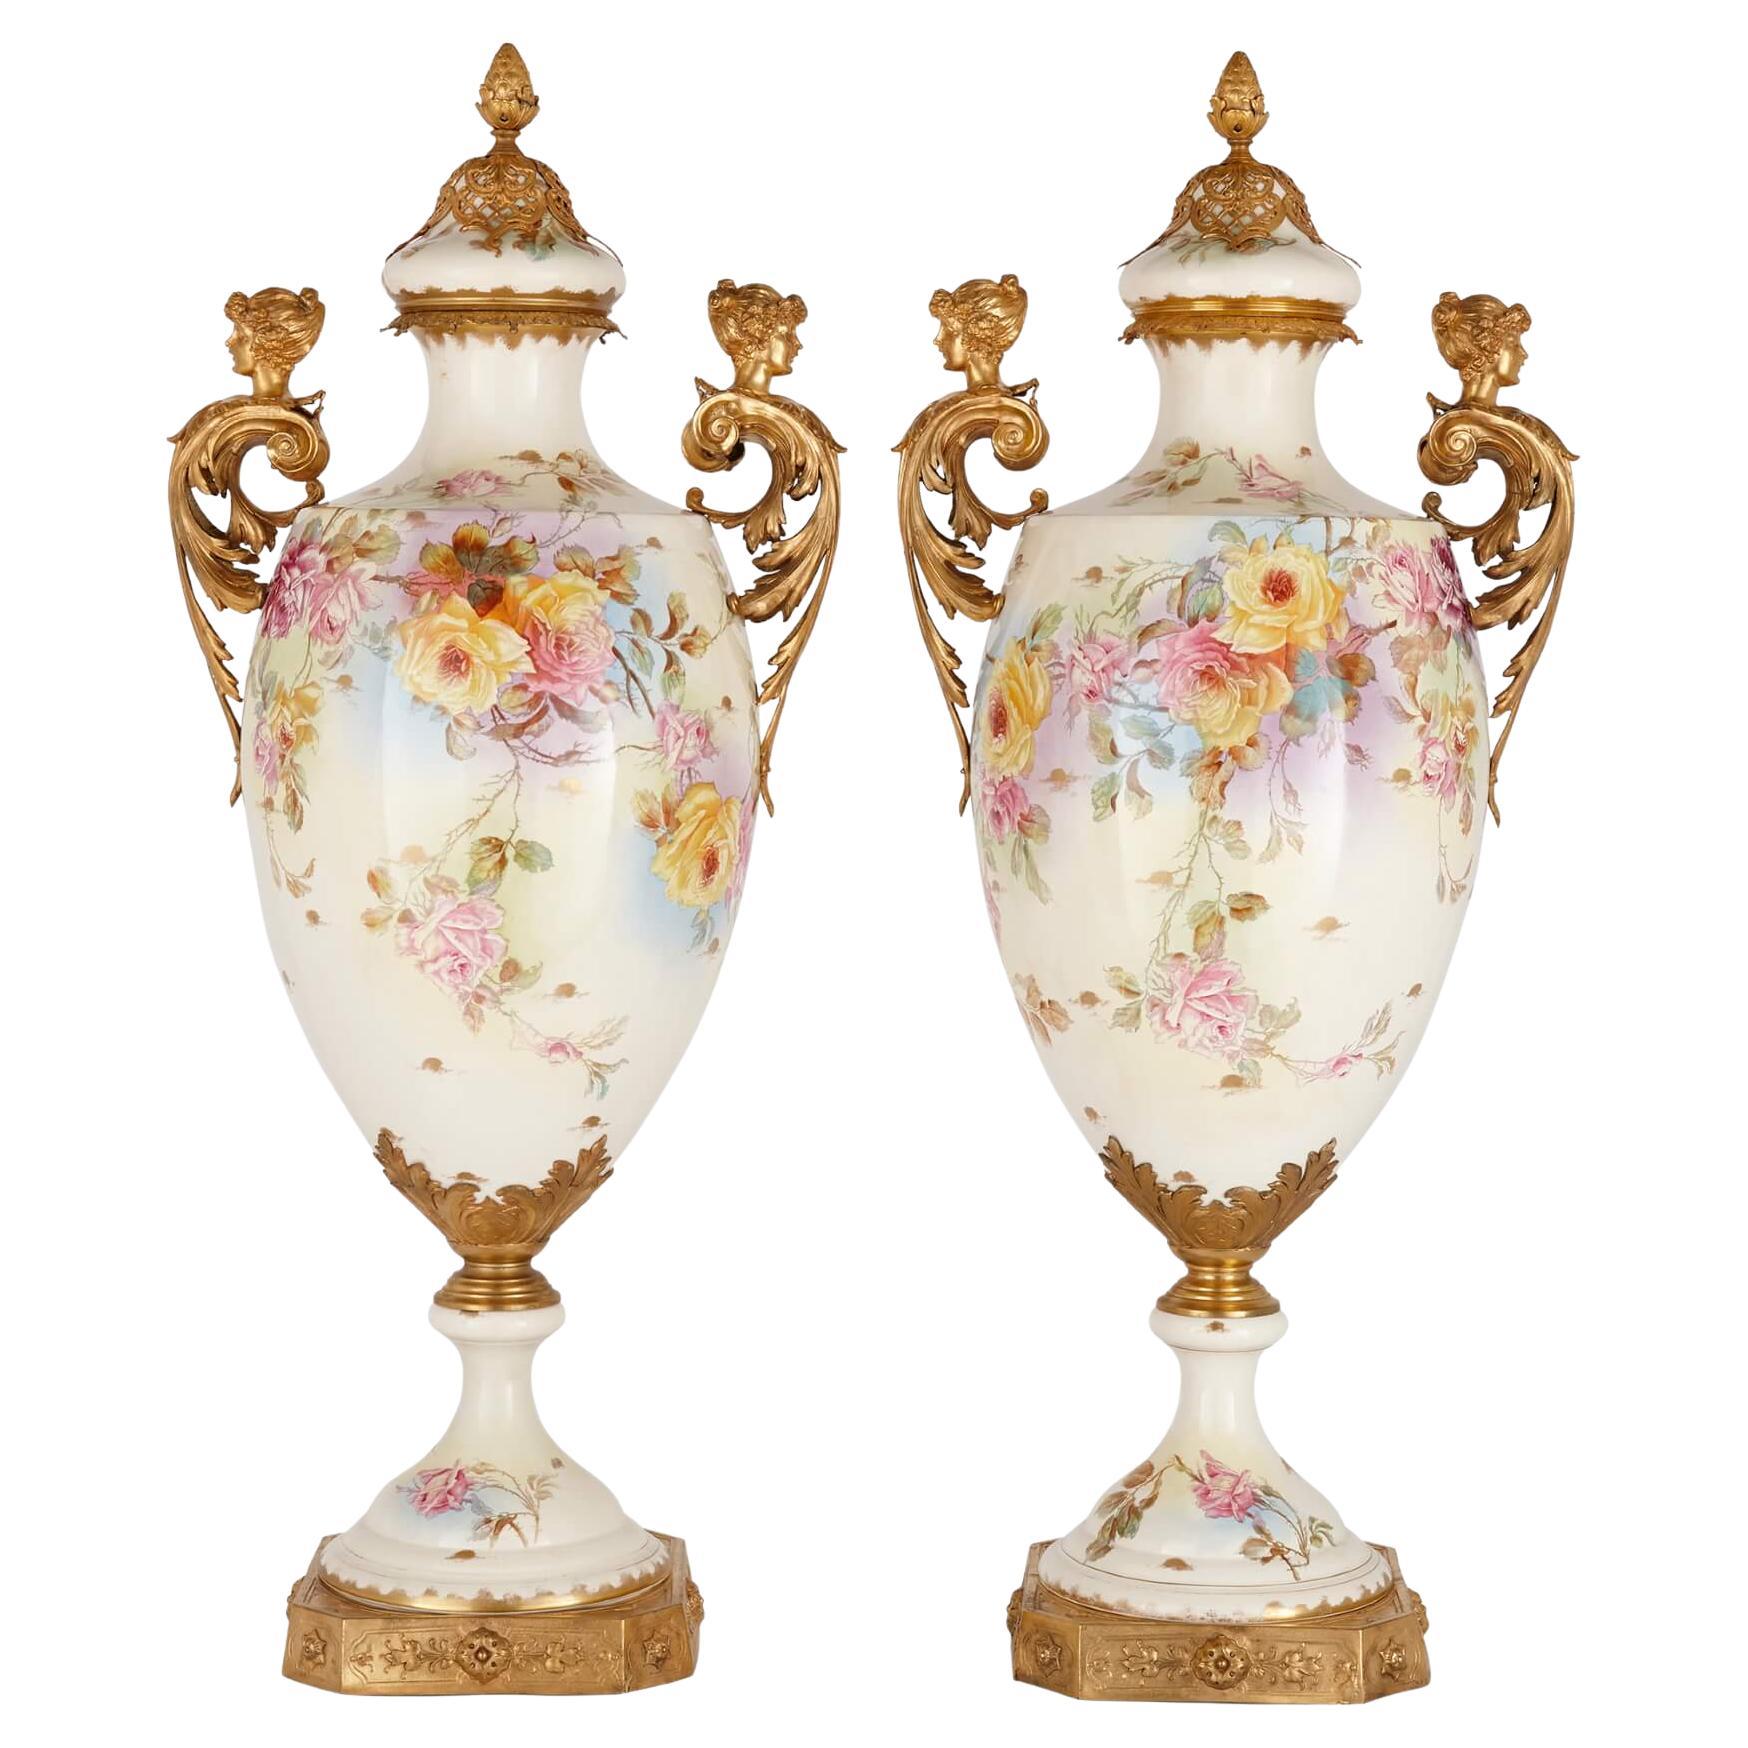 Pair of Large Sèvres-style Porcelain and Gilt-Metal Vases For Sale